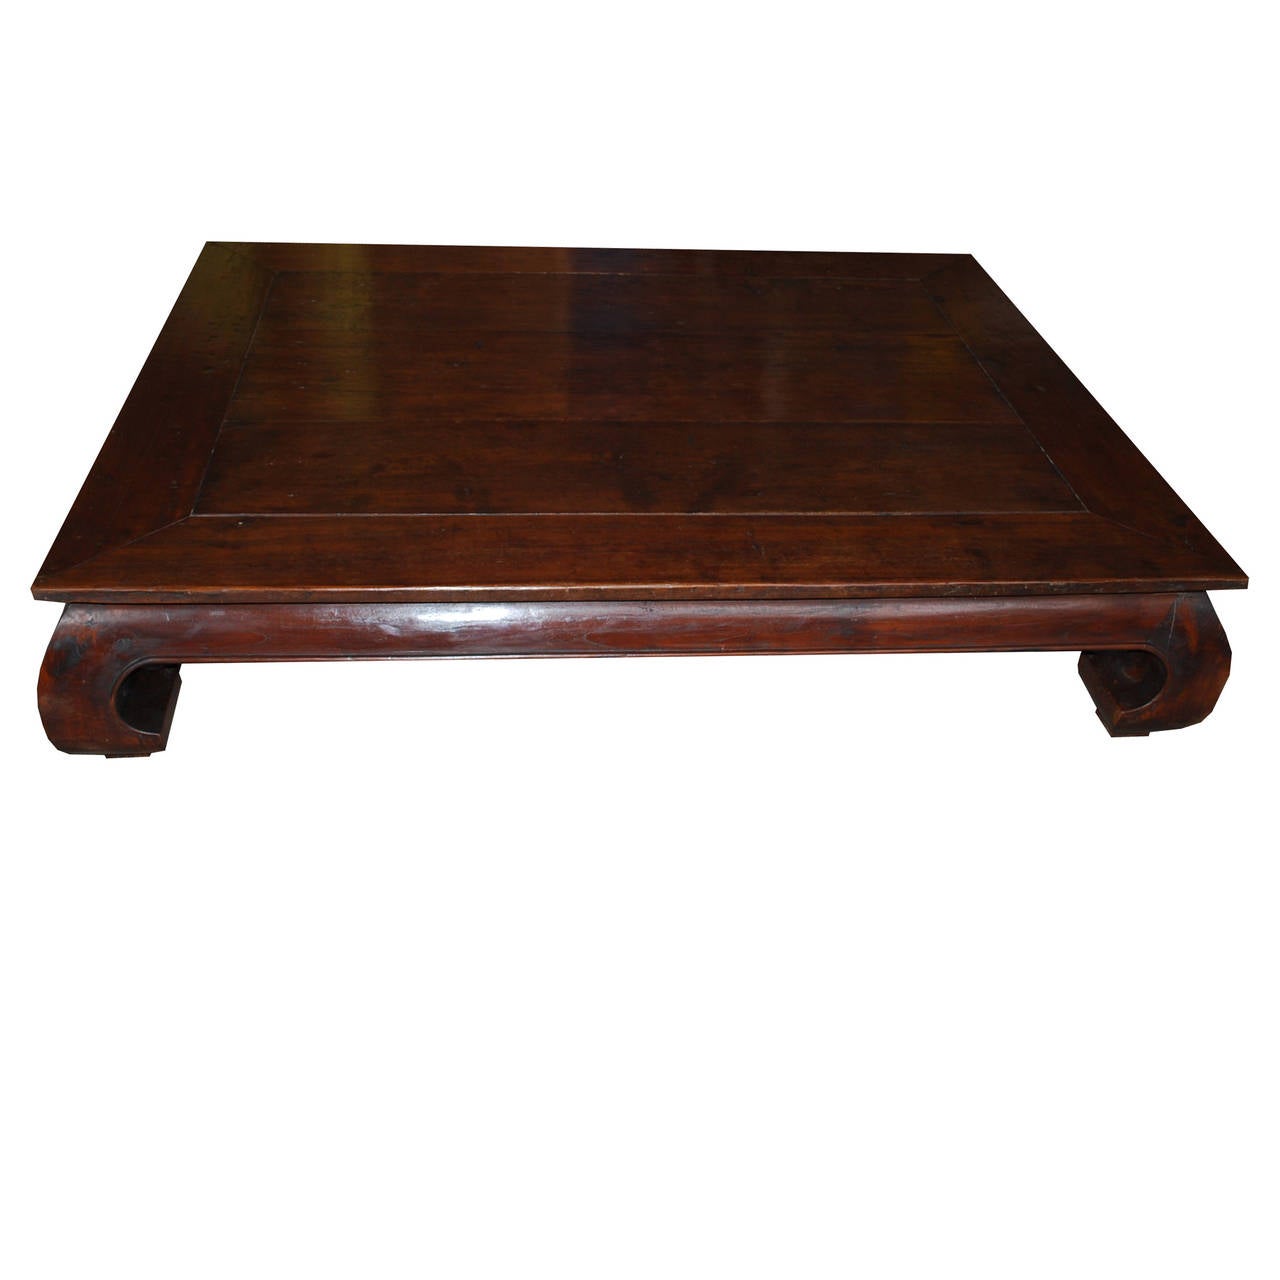 Indonesian 20th Century Colonial Opium Leg Table